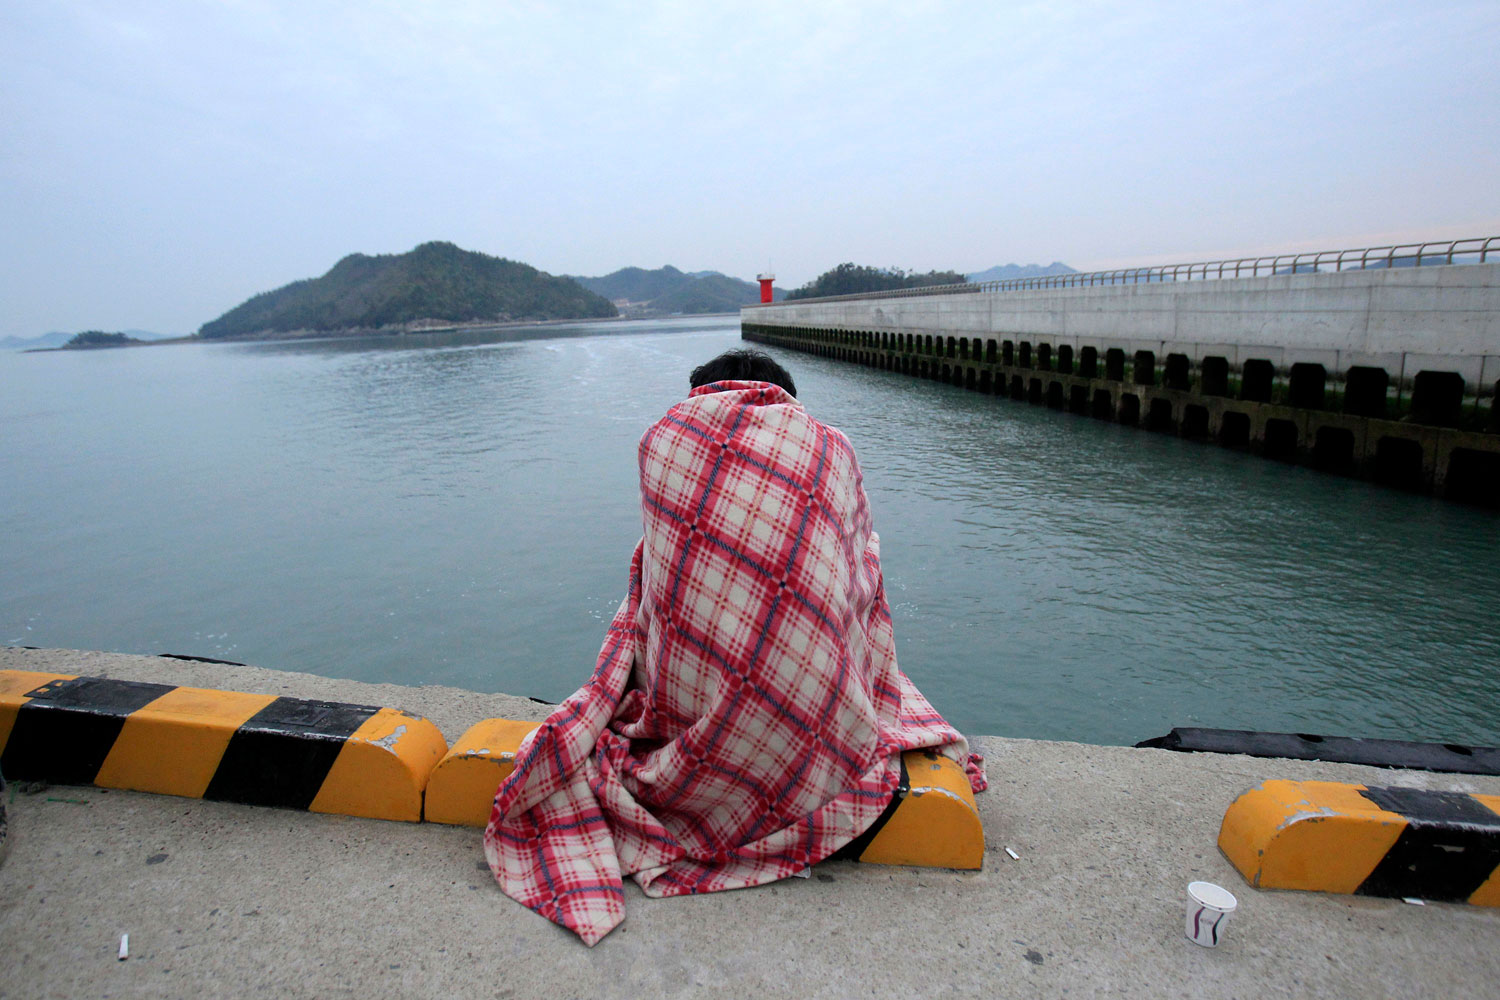 A relative waits for their missing loved one at a port in Jindo, South Korea, April 16, 2014 following the capsizing of the South Korean ferry 'Sewol'.